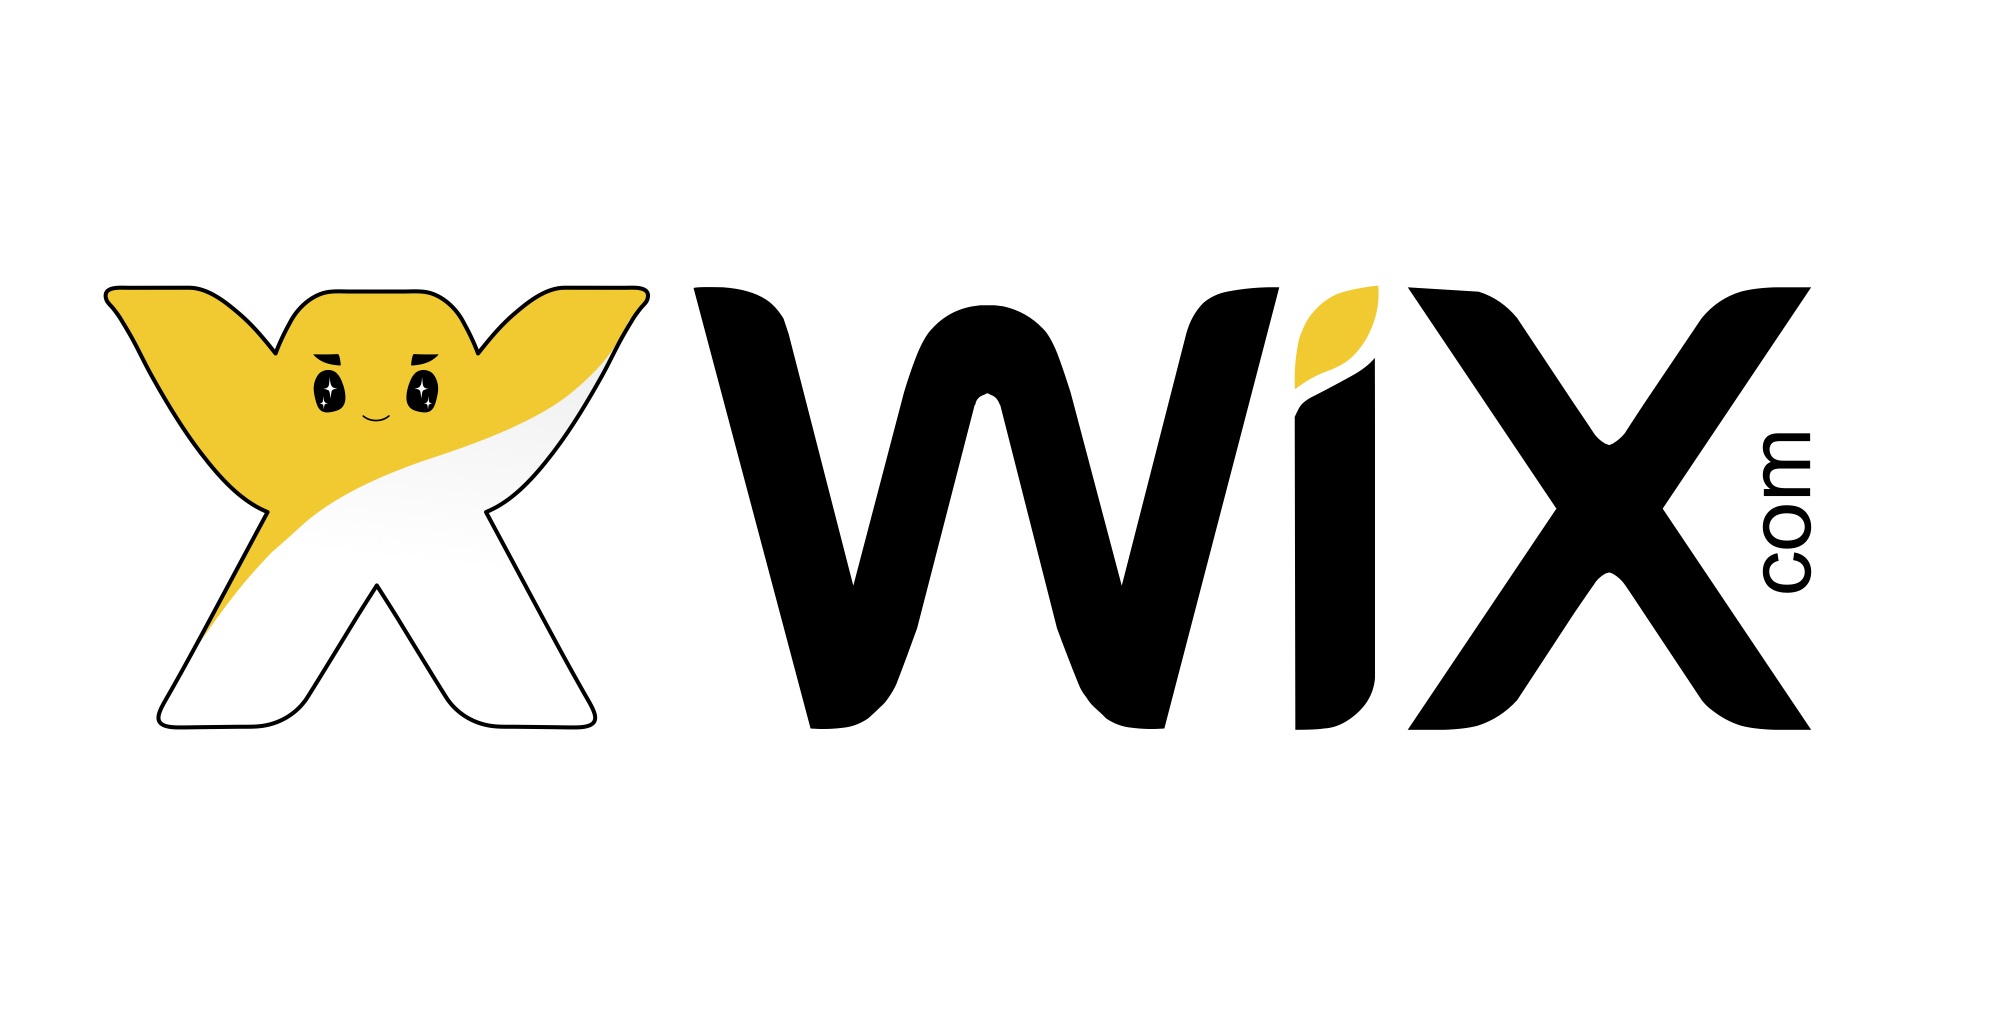 http://www.chater.biz/site/help/livechat-wix-com